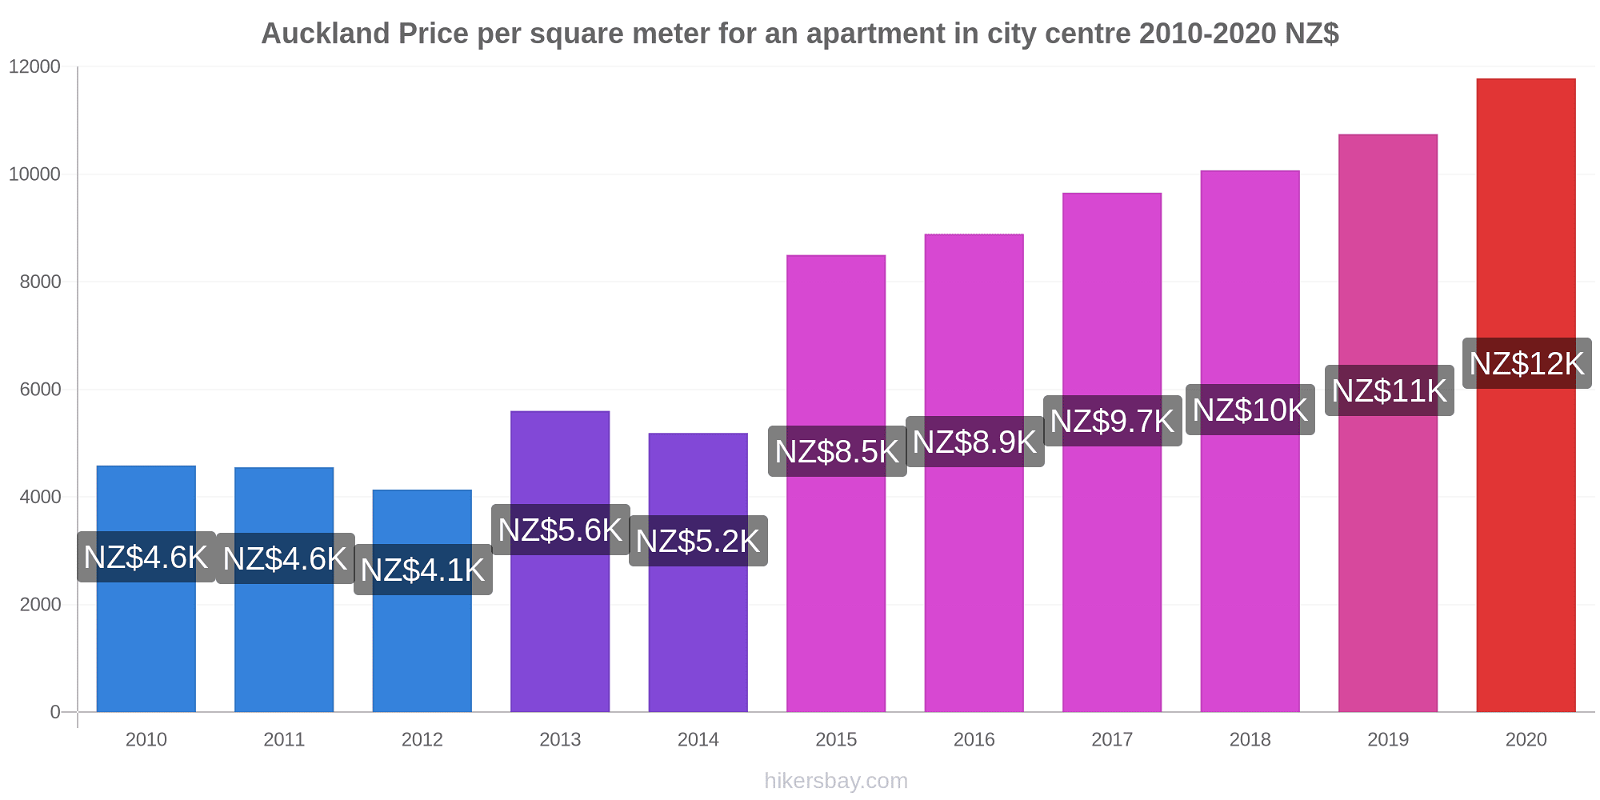 Auckland price changes Price per square meter for an apartment in city centre hikersbay.com